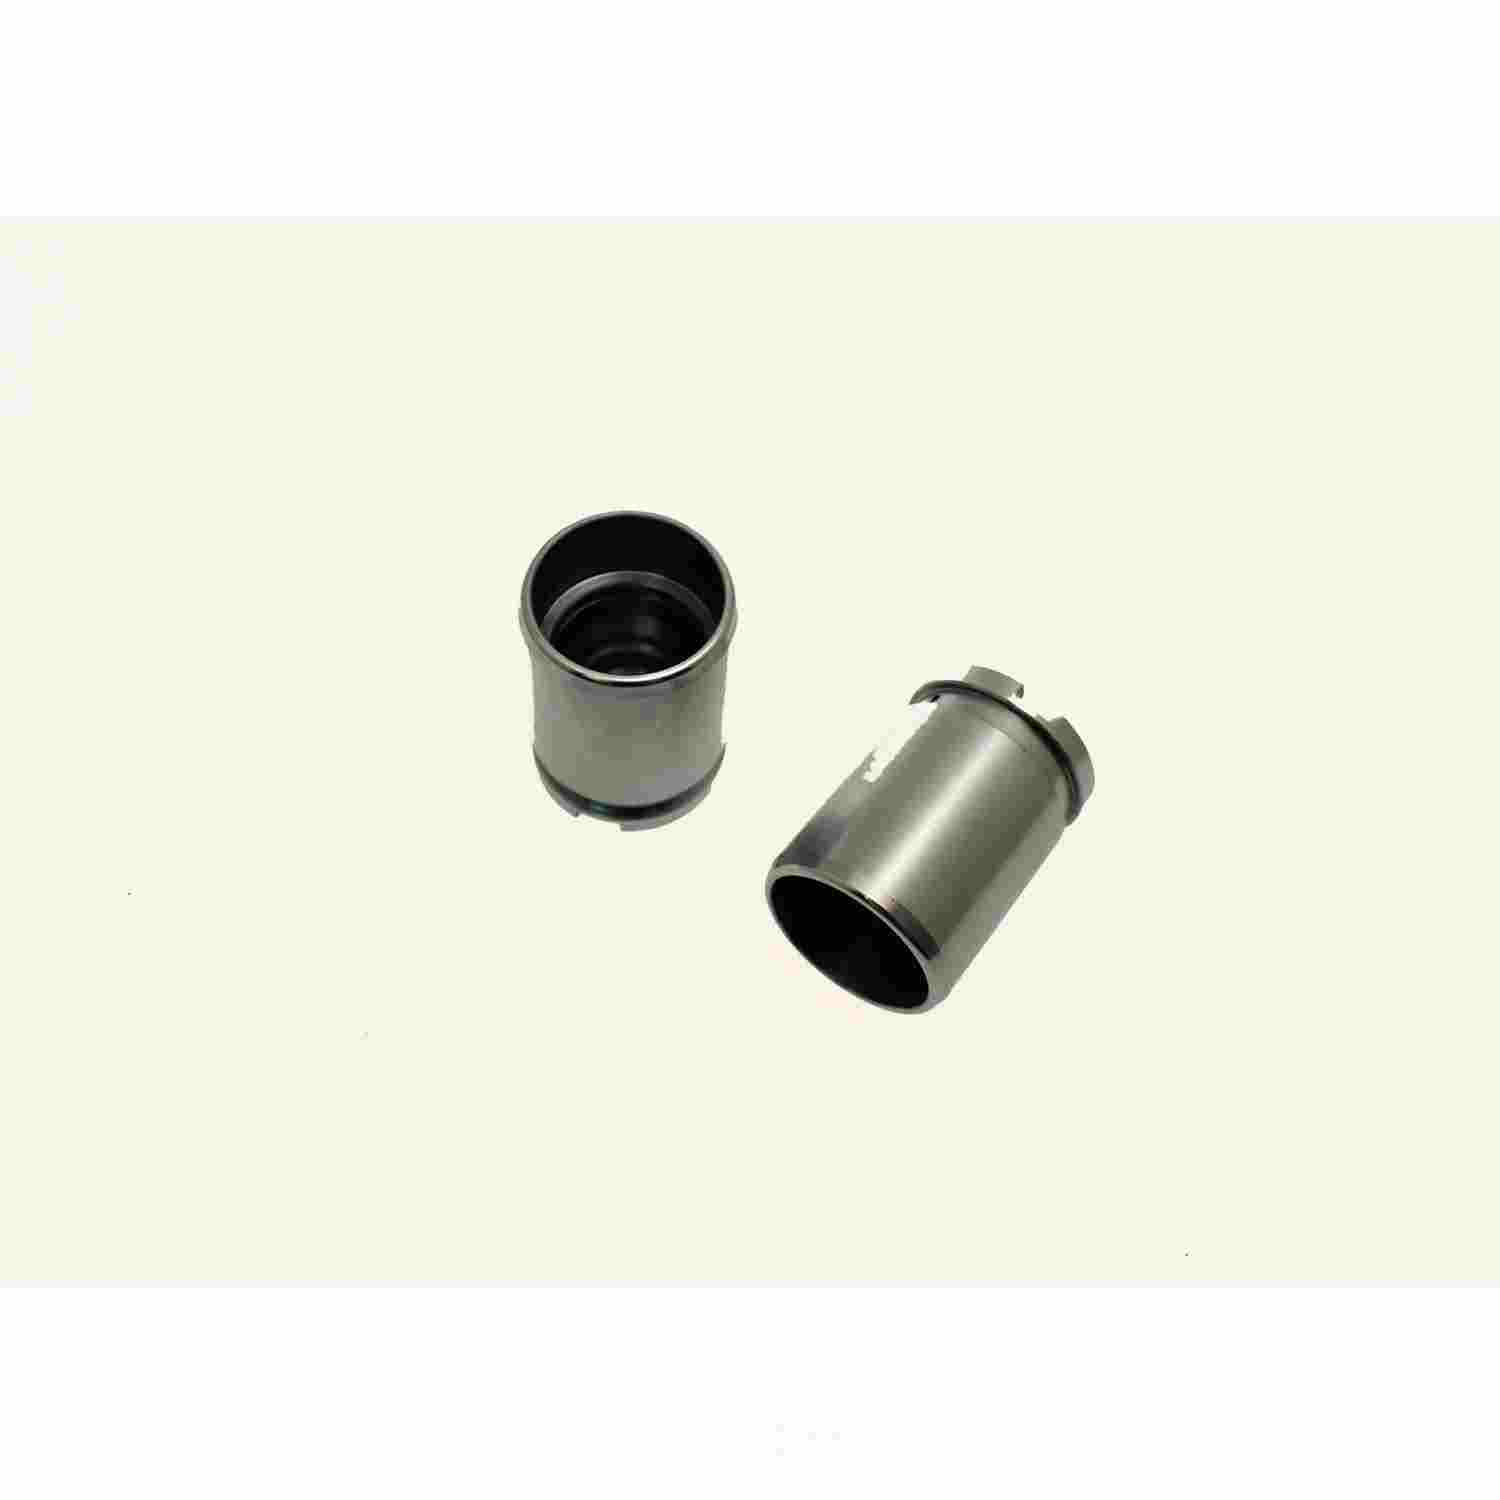 CARLSON QUALITY BRAKE PARTS - Piston Shell Only - CRL 7910